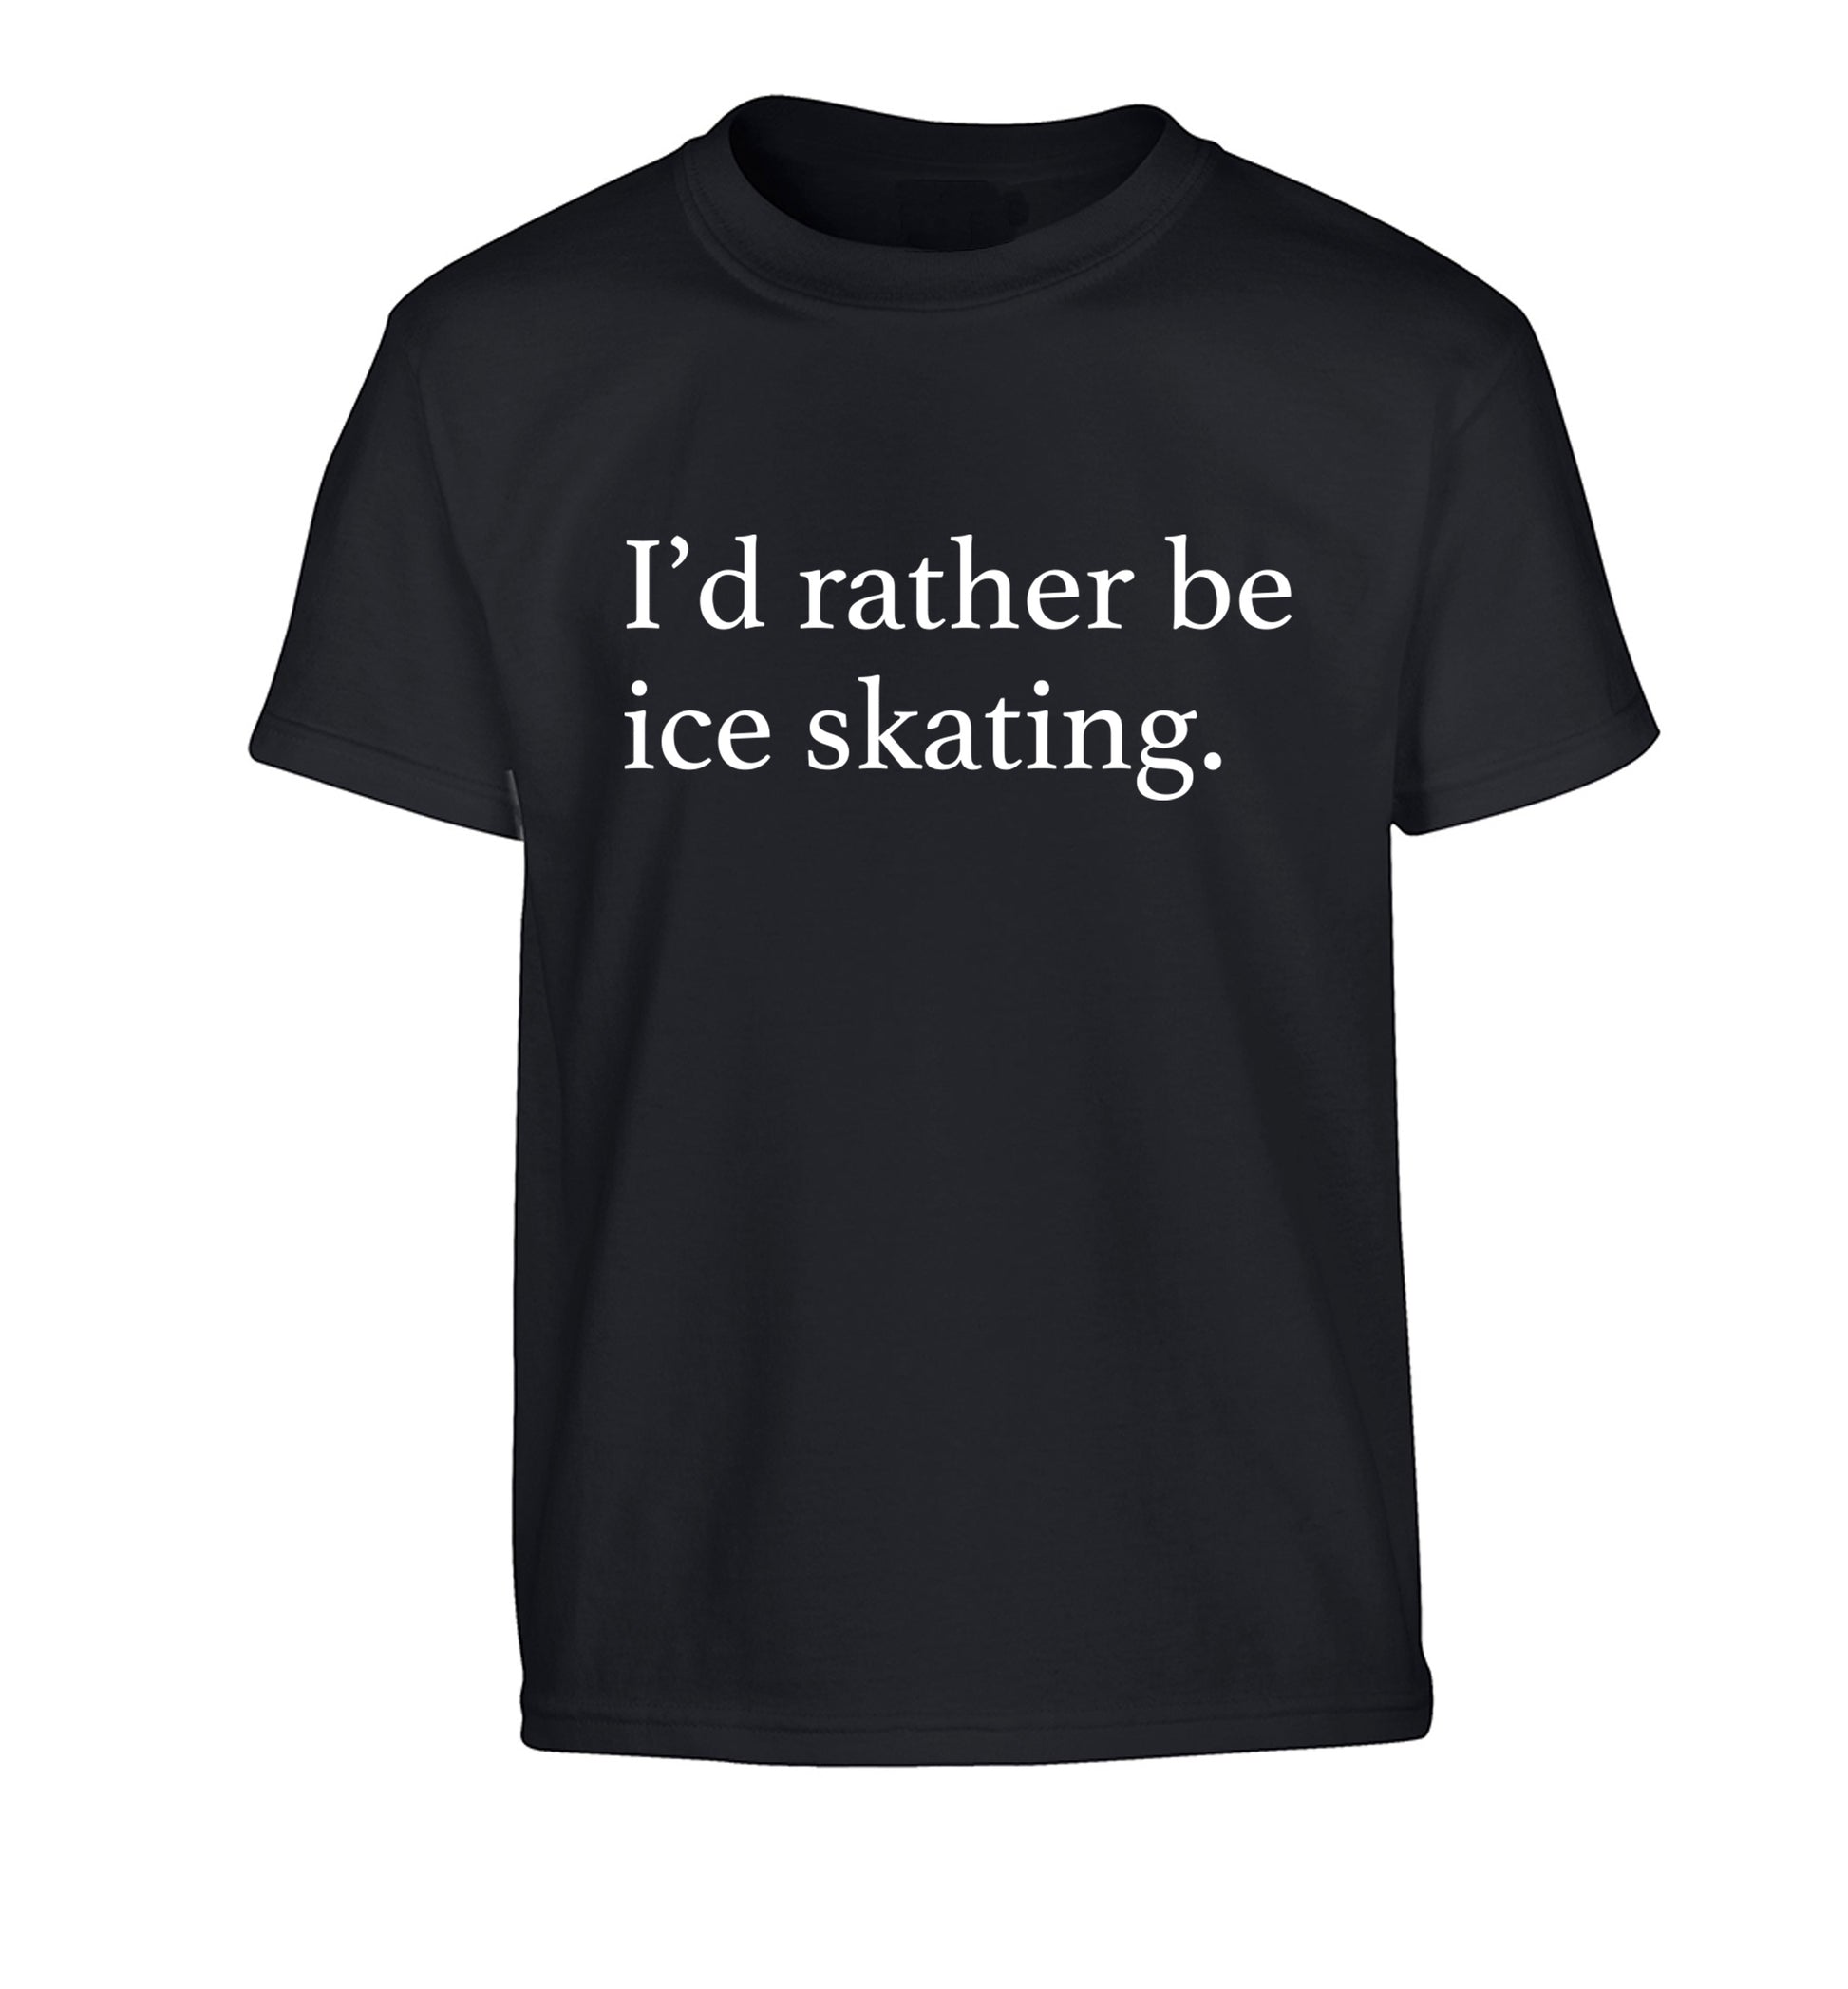 I'd rather be ice skating Children's black Tshirt 12-14 Years